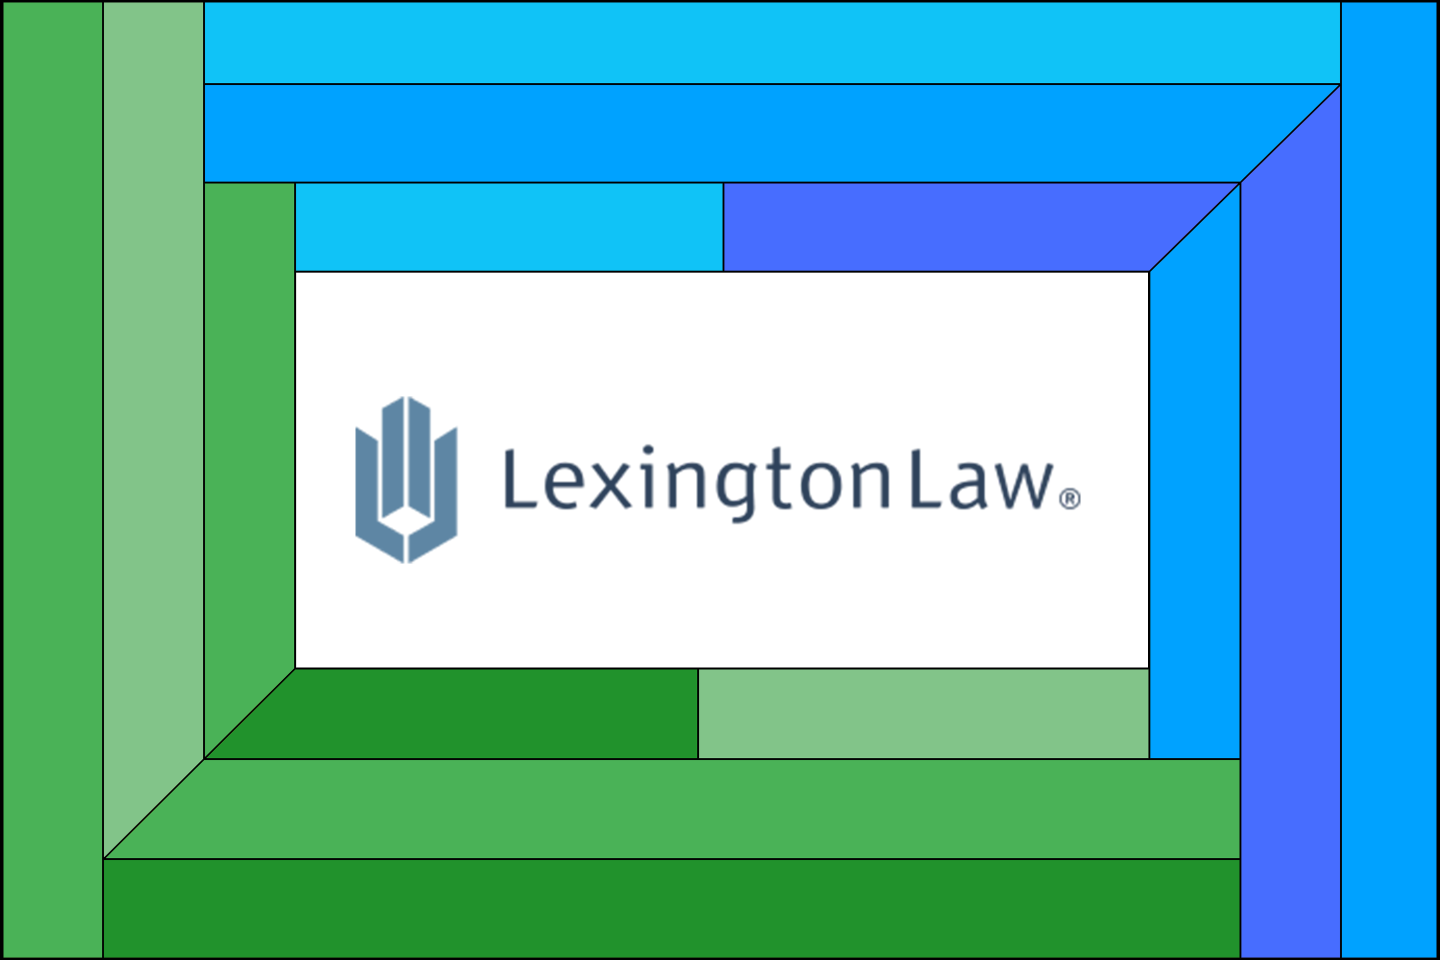 The Lexington Law logo on a graphic background.